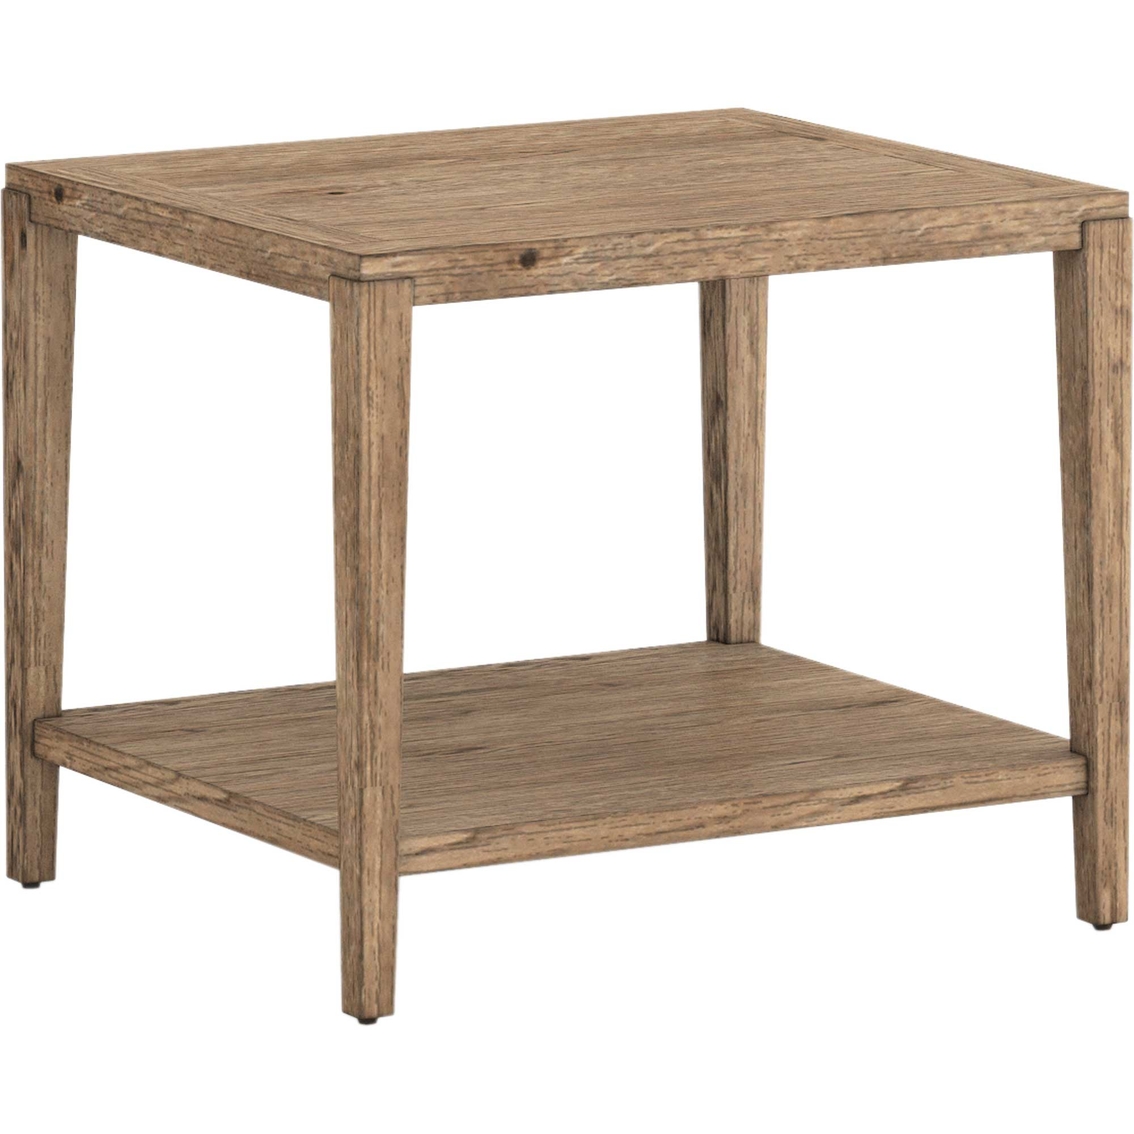 A.r.t. Furniture Passage Square End Table | Living Room Tables ...